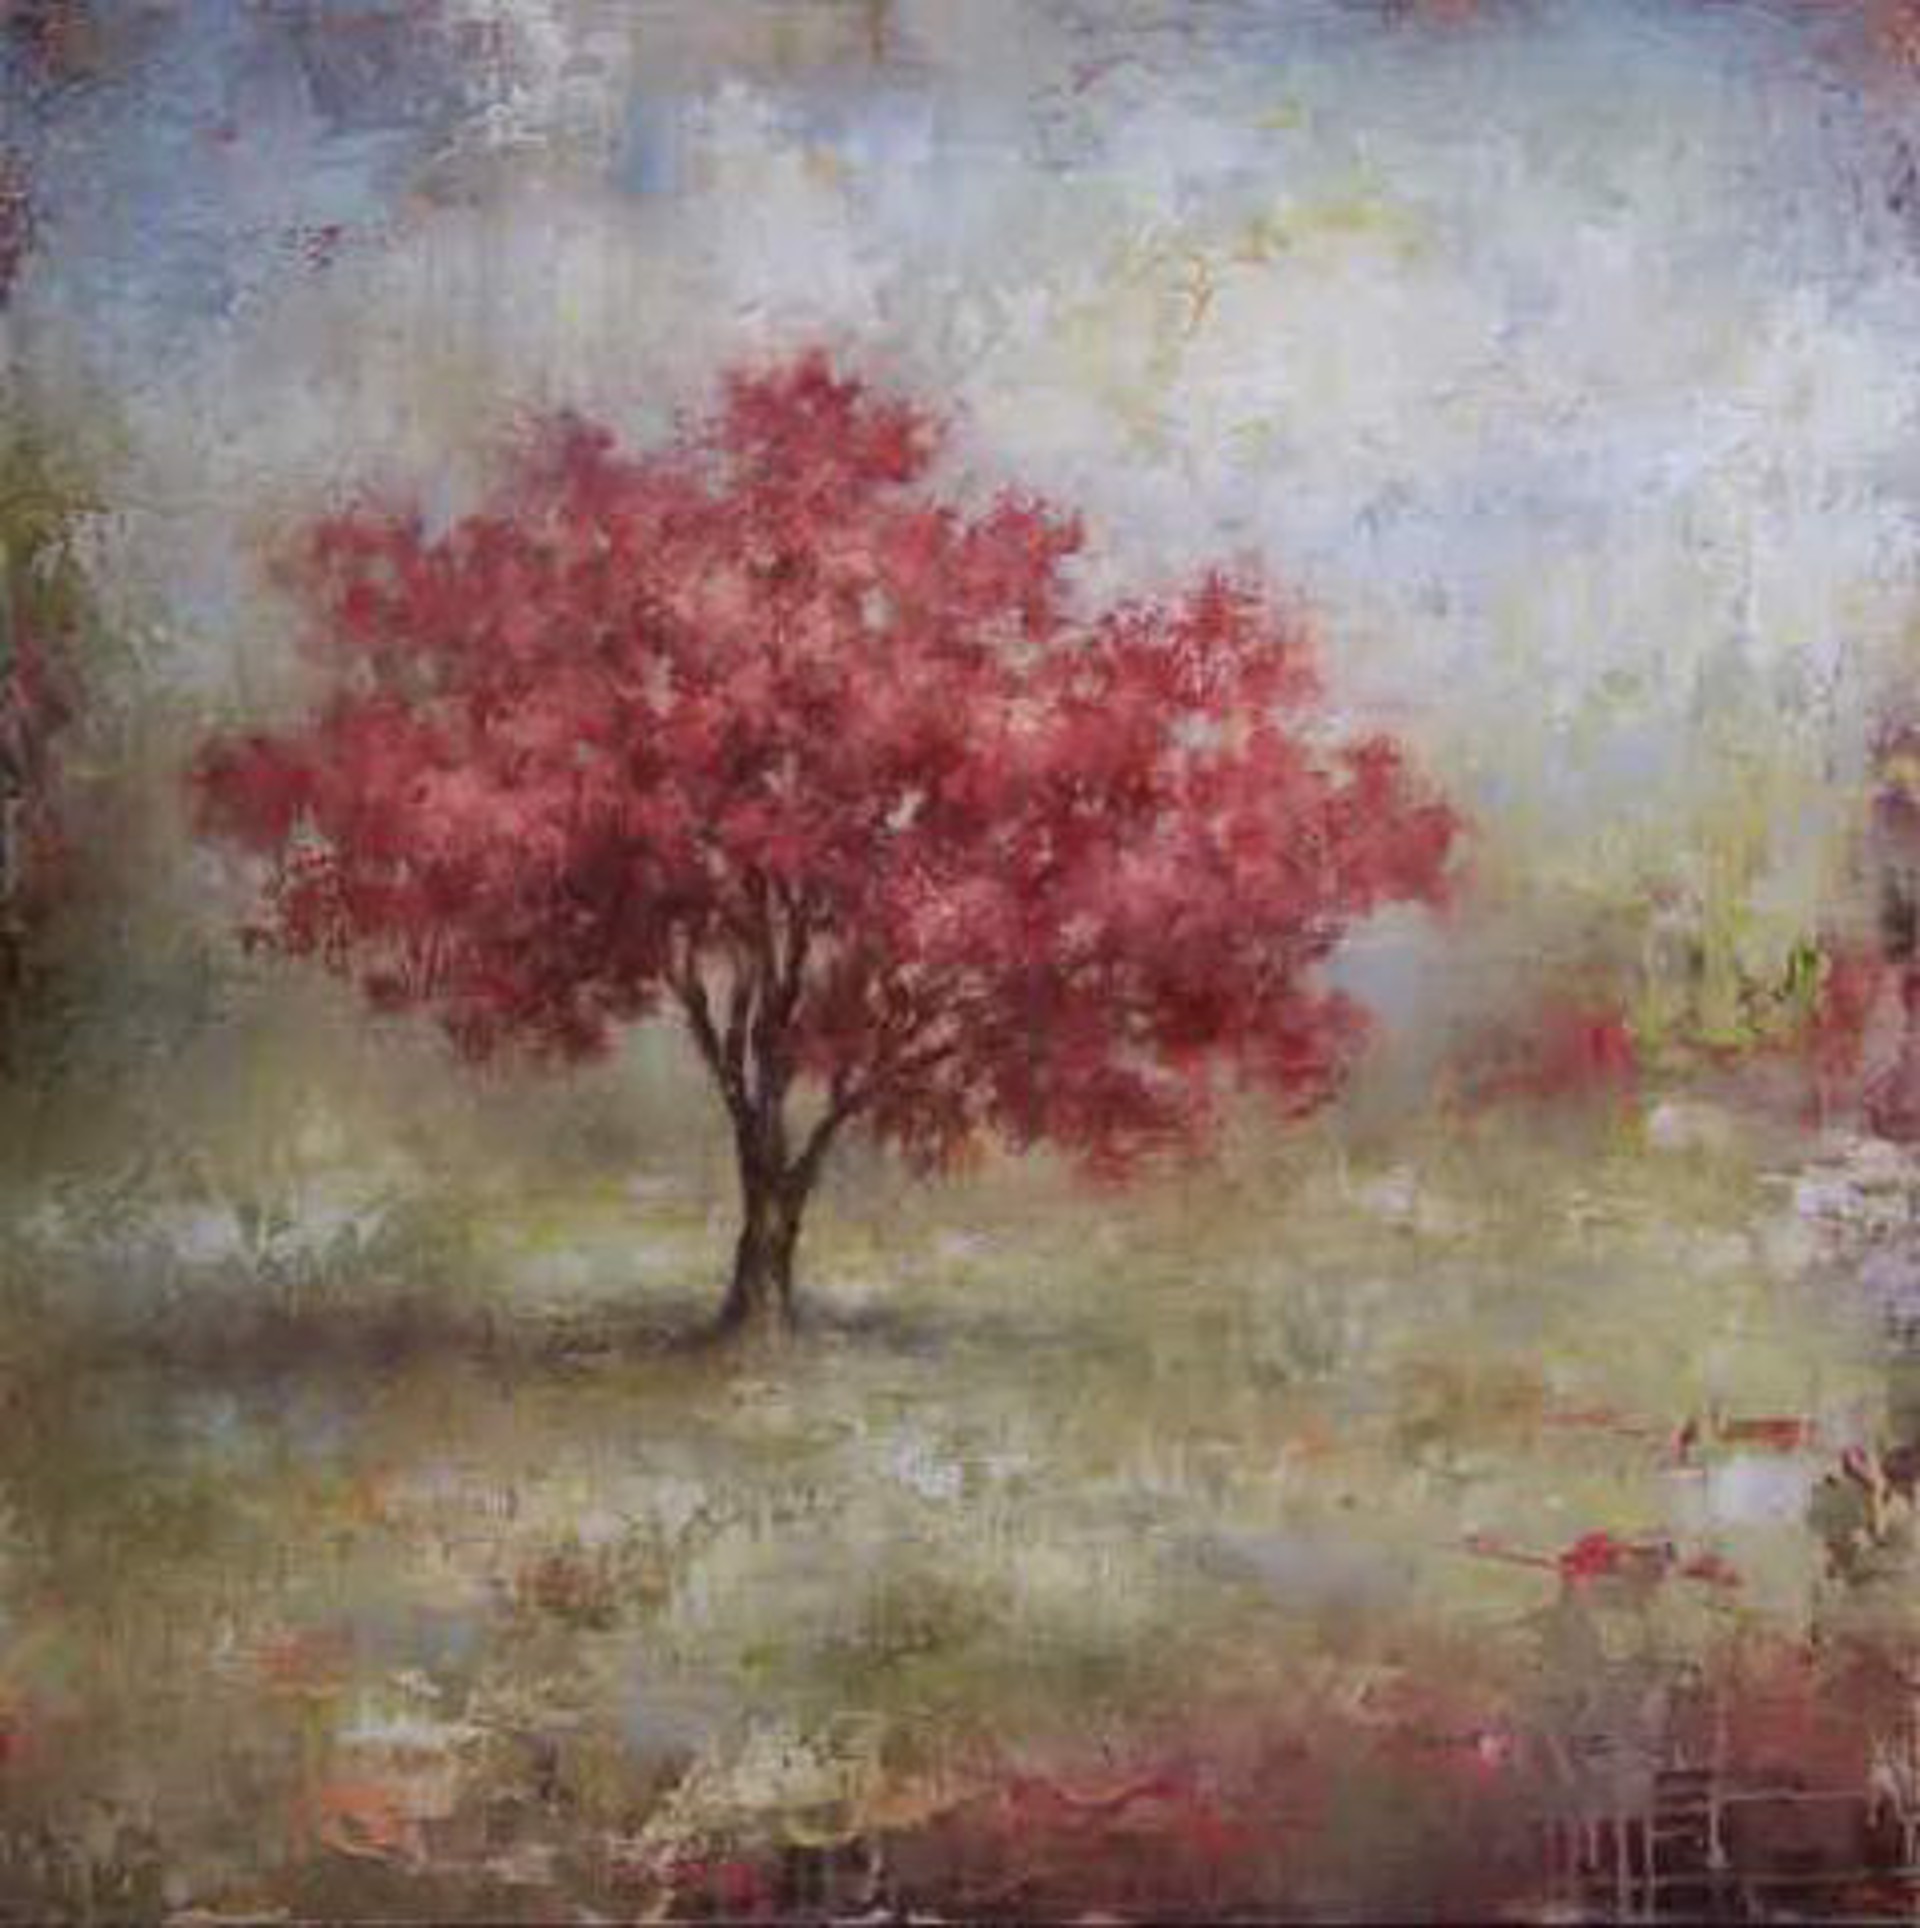 Symphony in Red by Tracey Lane